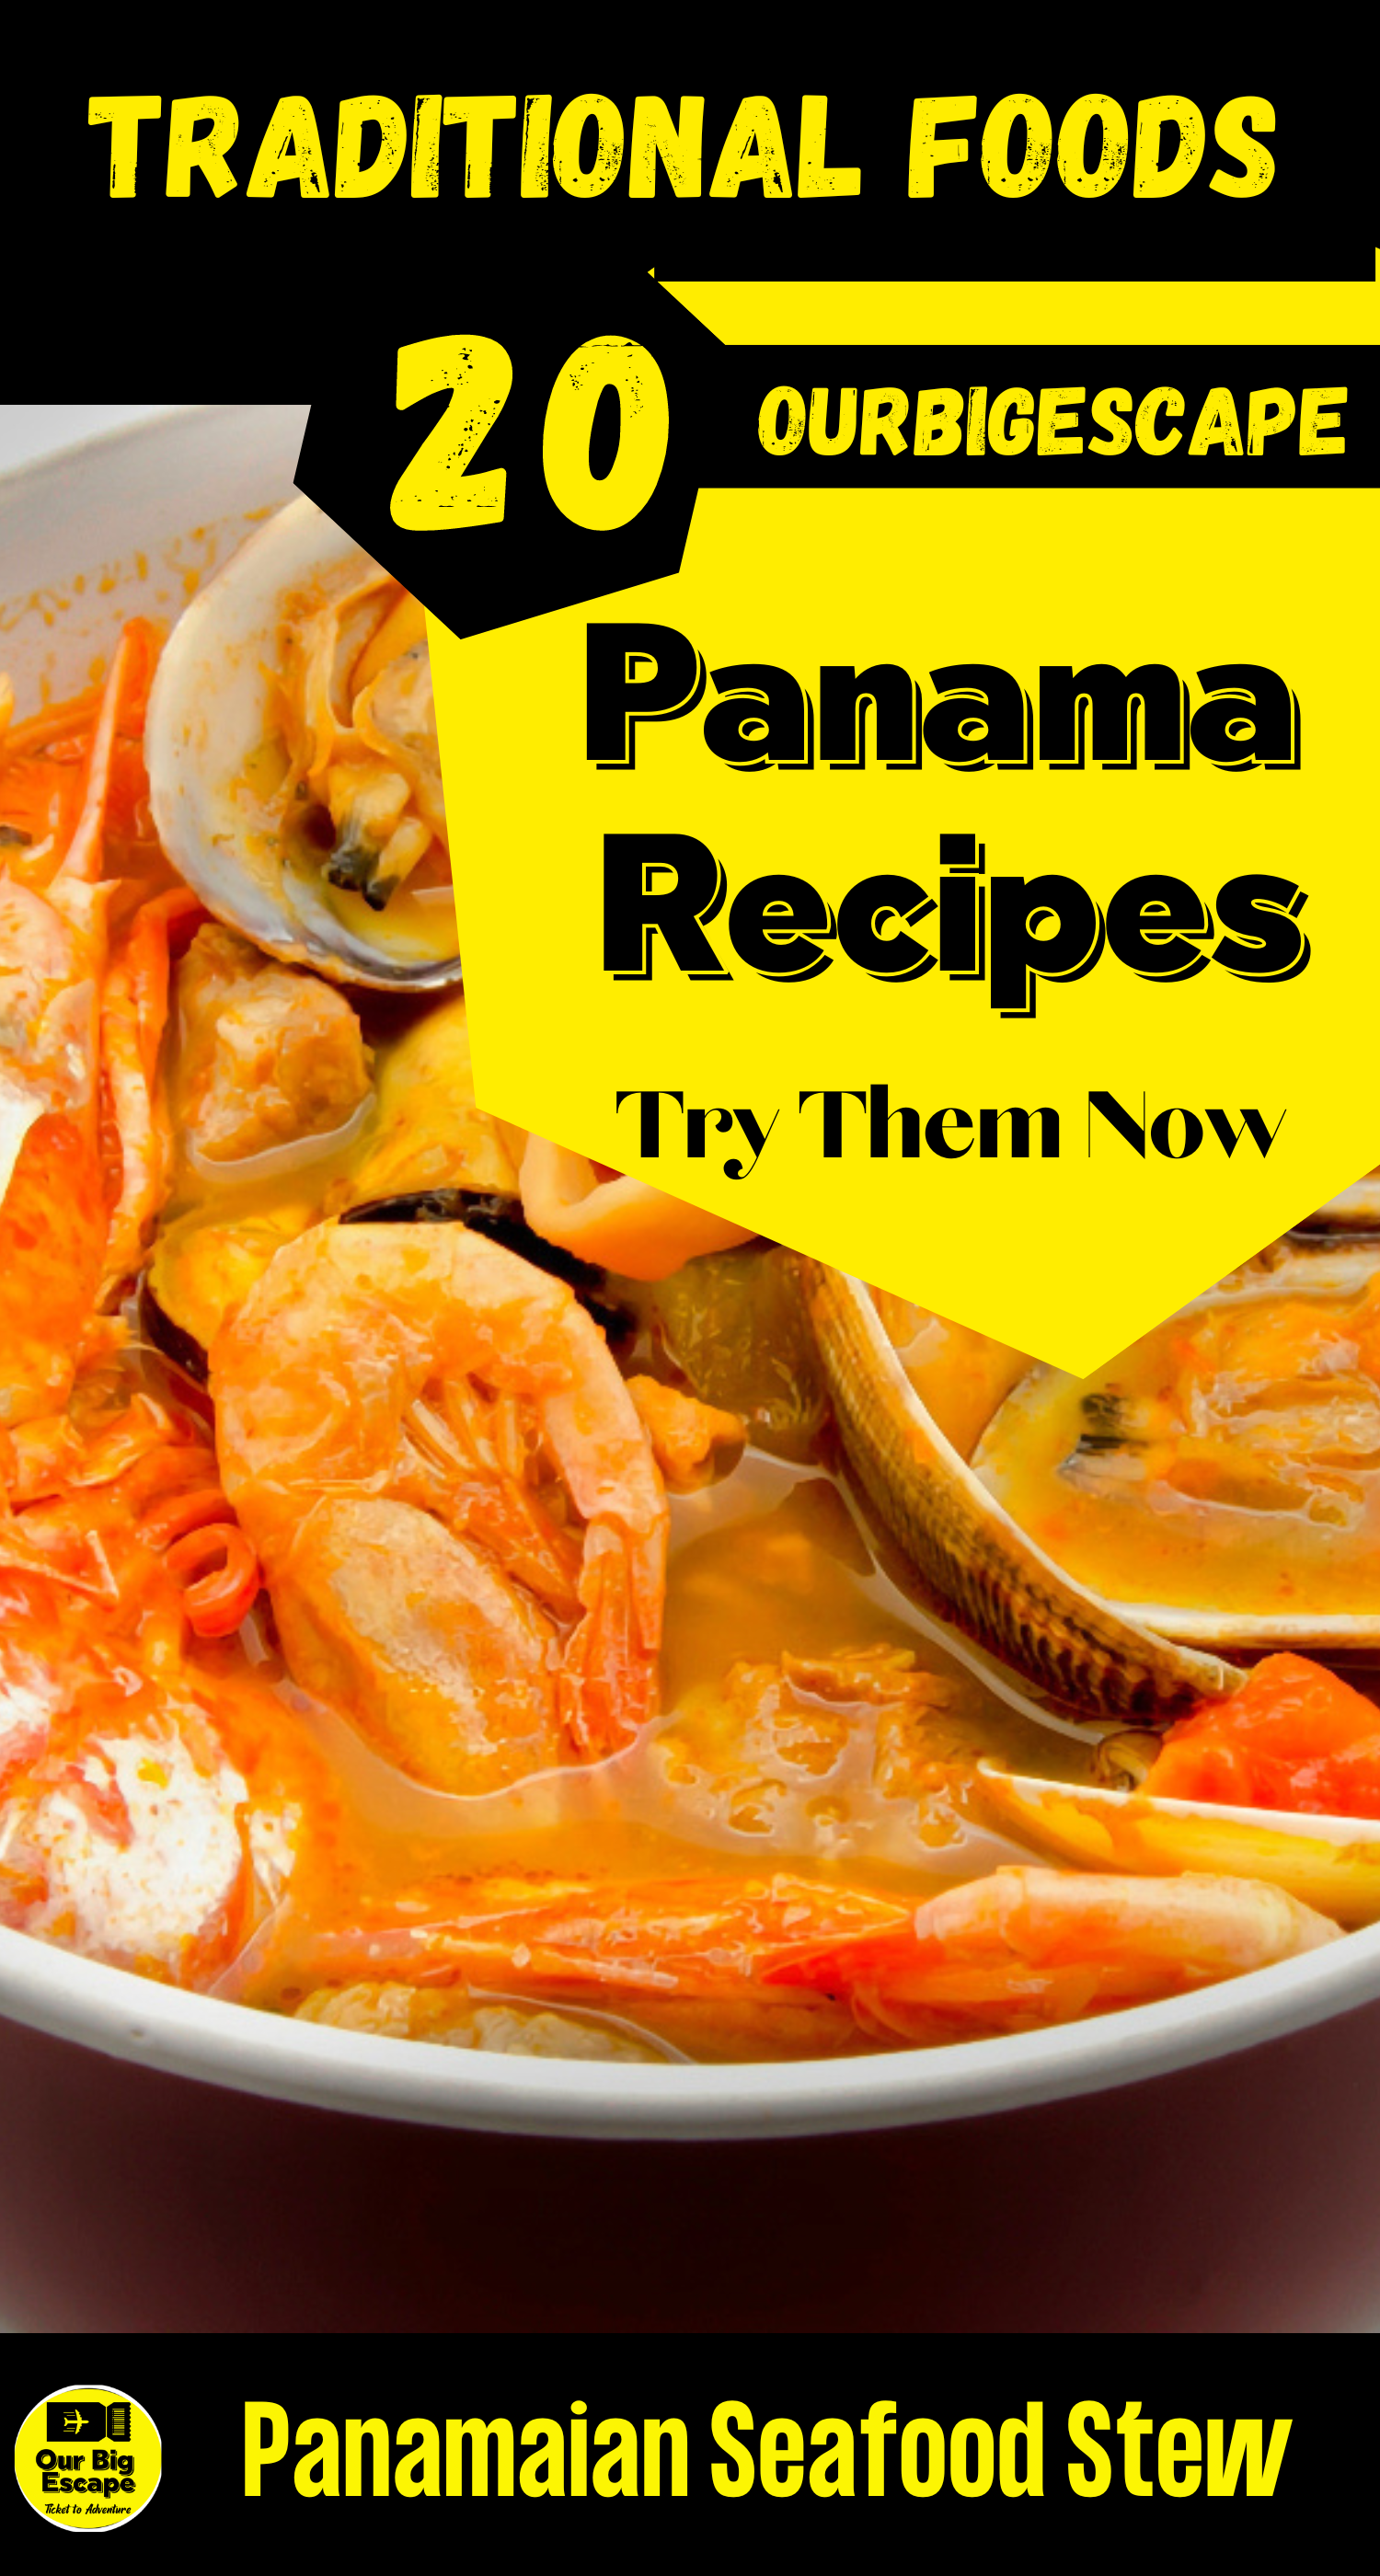 Panamanian Seafood Stew - Sancocho de mariscos, or Panamanian Seafood Stew, is a popular dish in Panama. You'll find fresh fish, shrimp, crab, and clams, along with yucca, plantains, and corn in this stew.